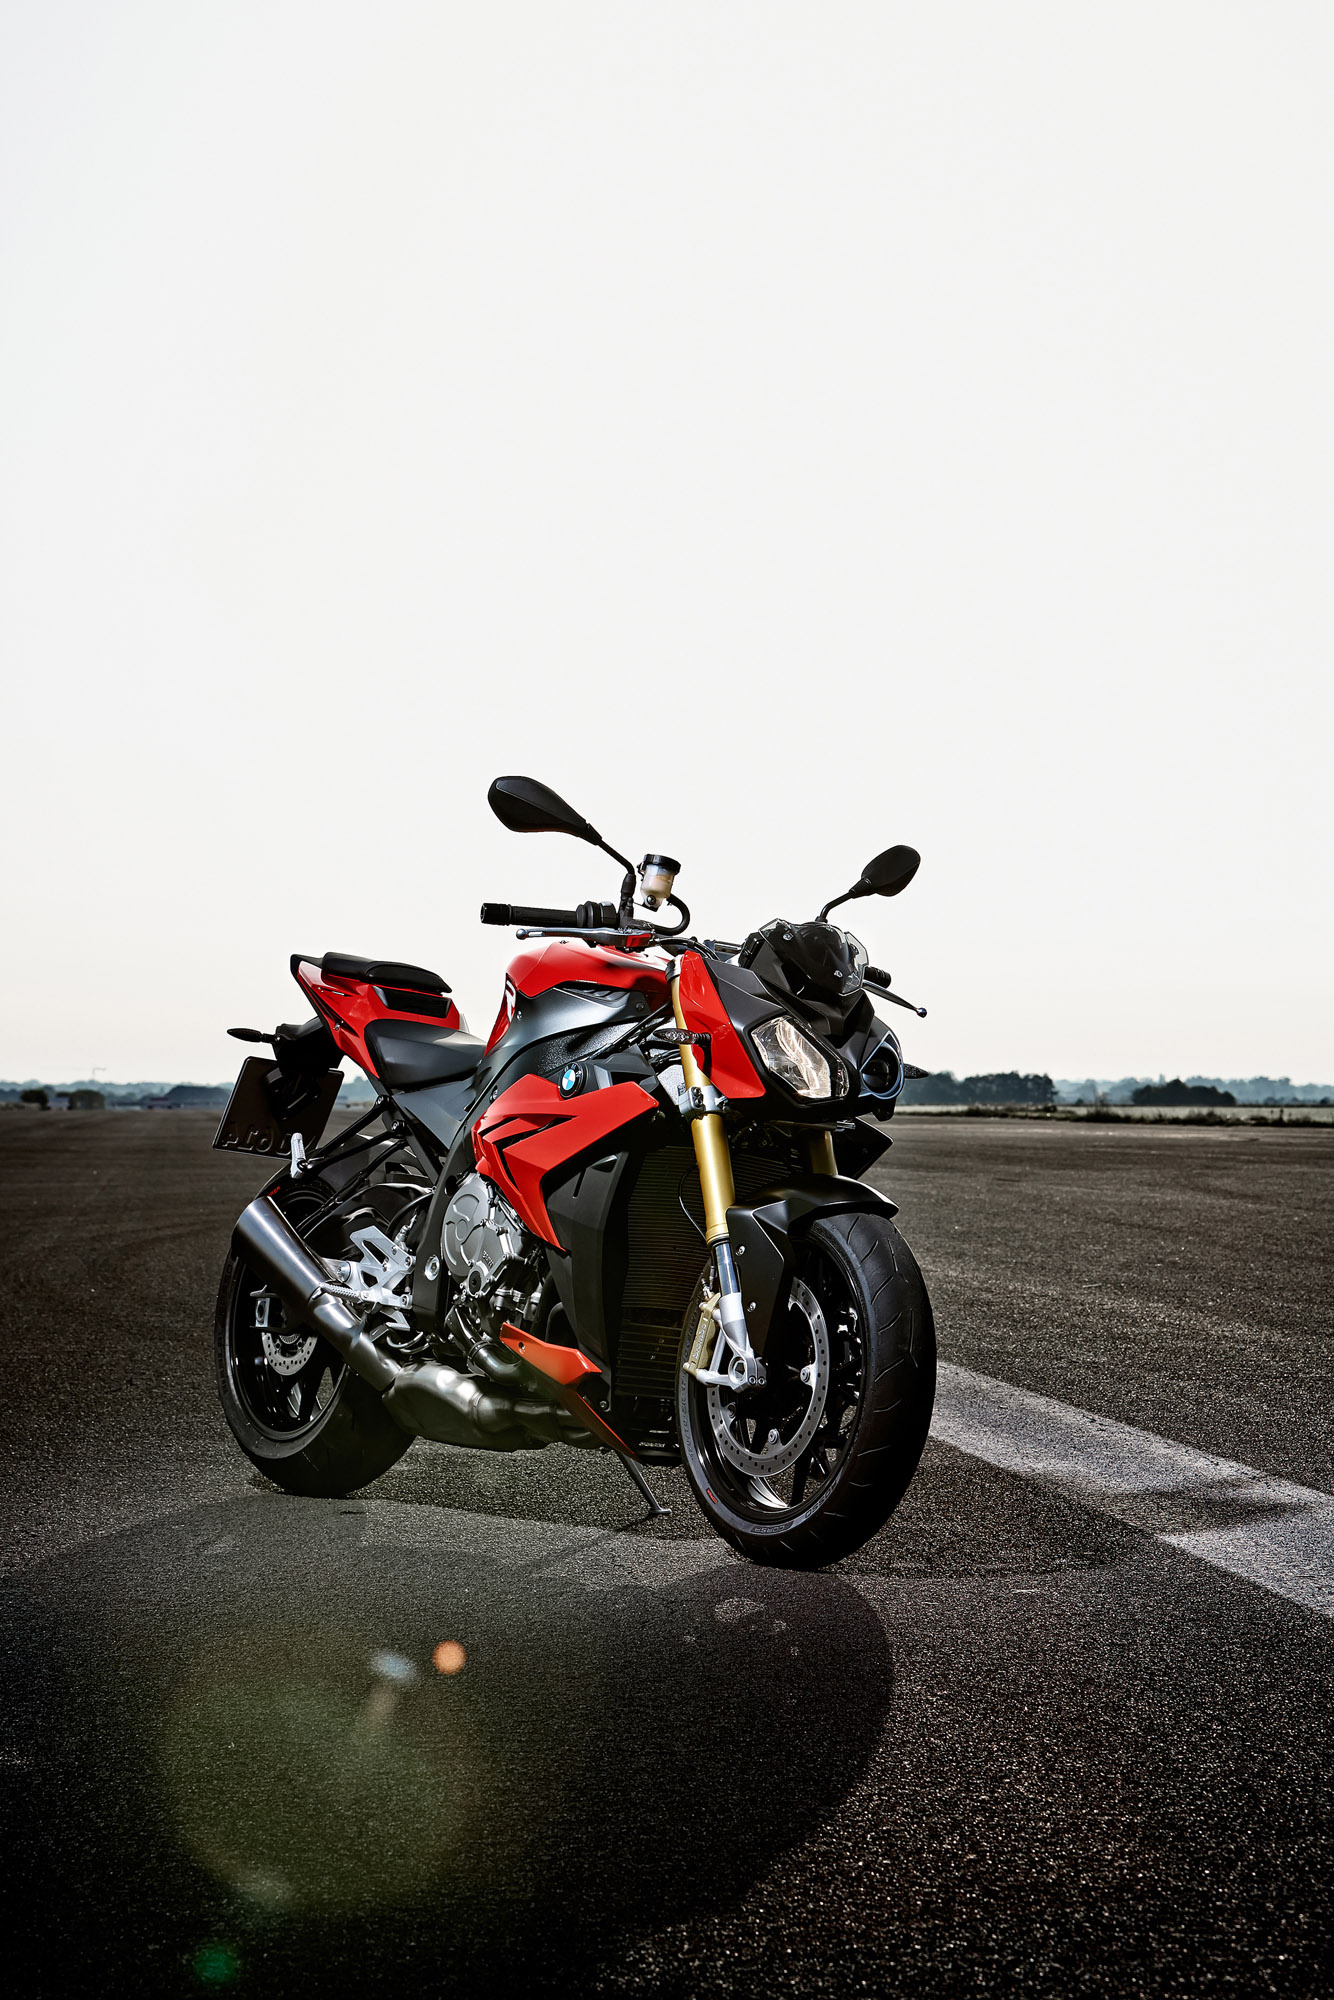 BMW S 1000 R, HD picture of 2014 model, Motorcycle beauty, 1340x2000 HD Phone